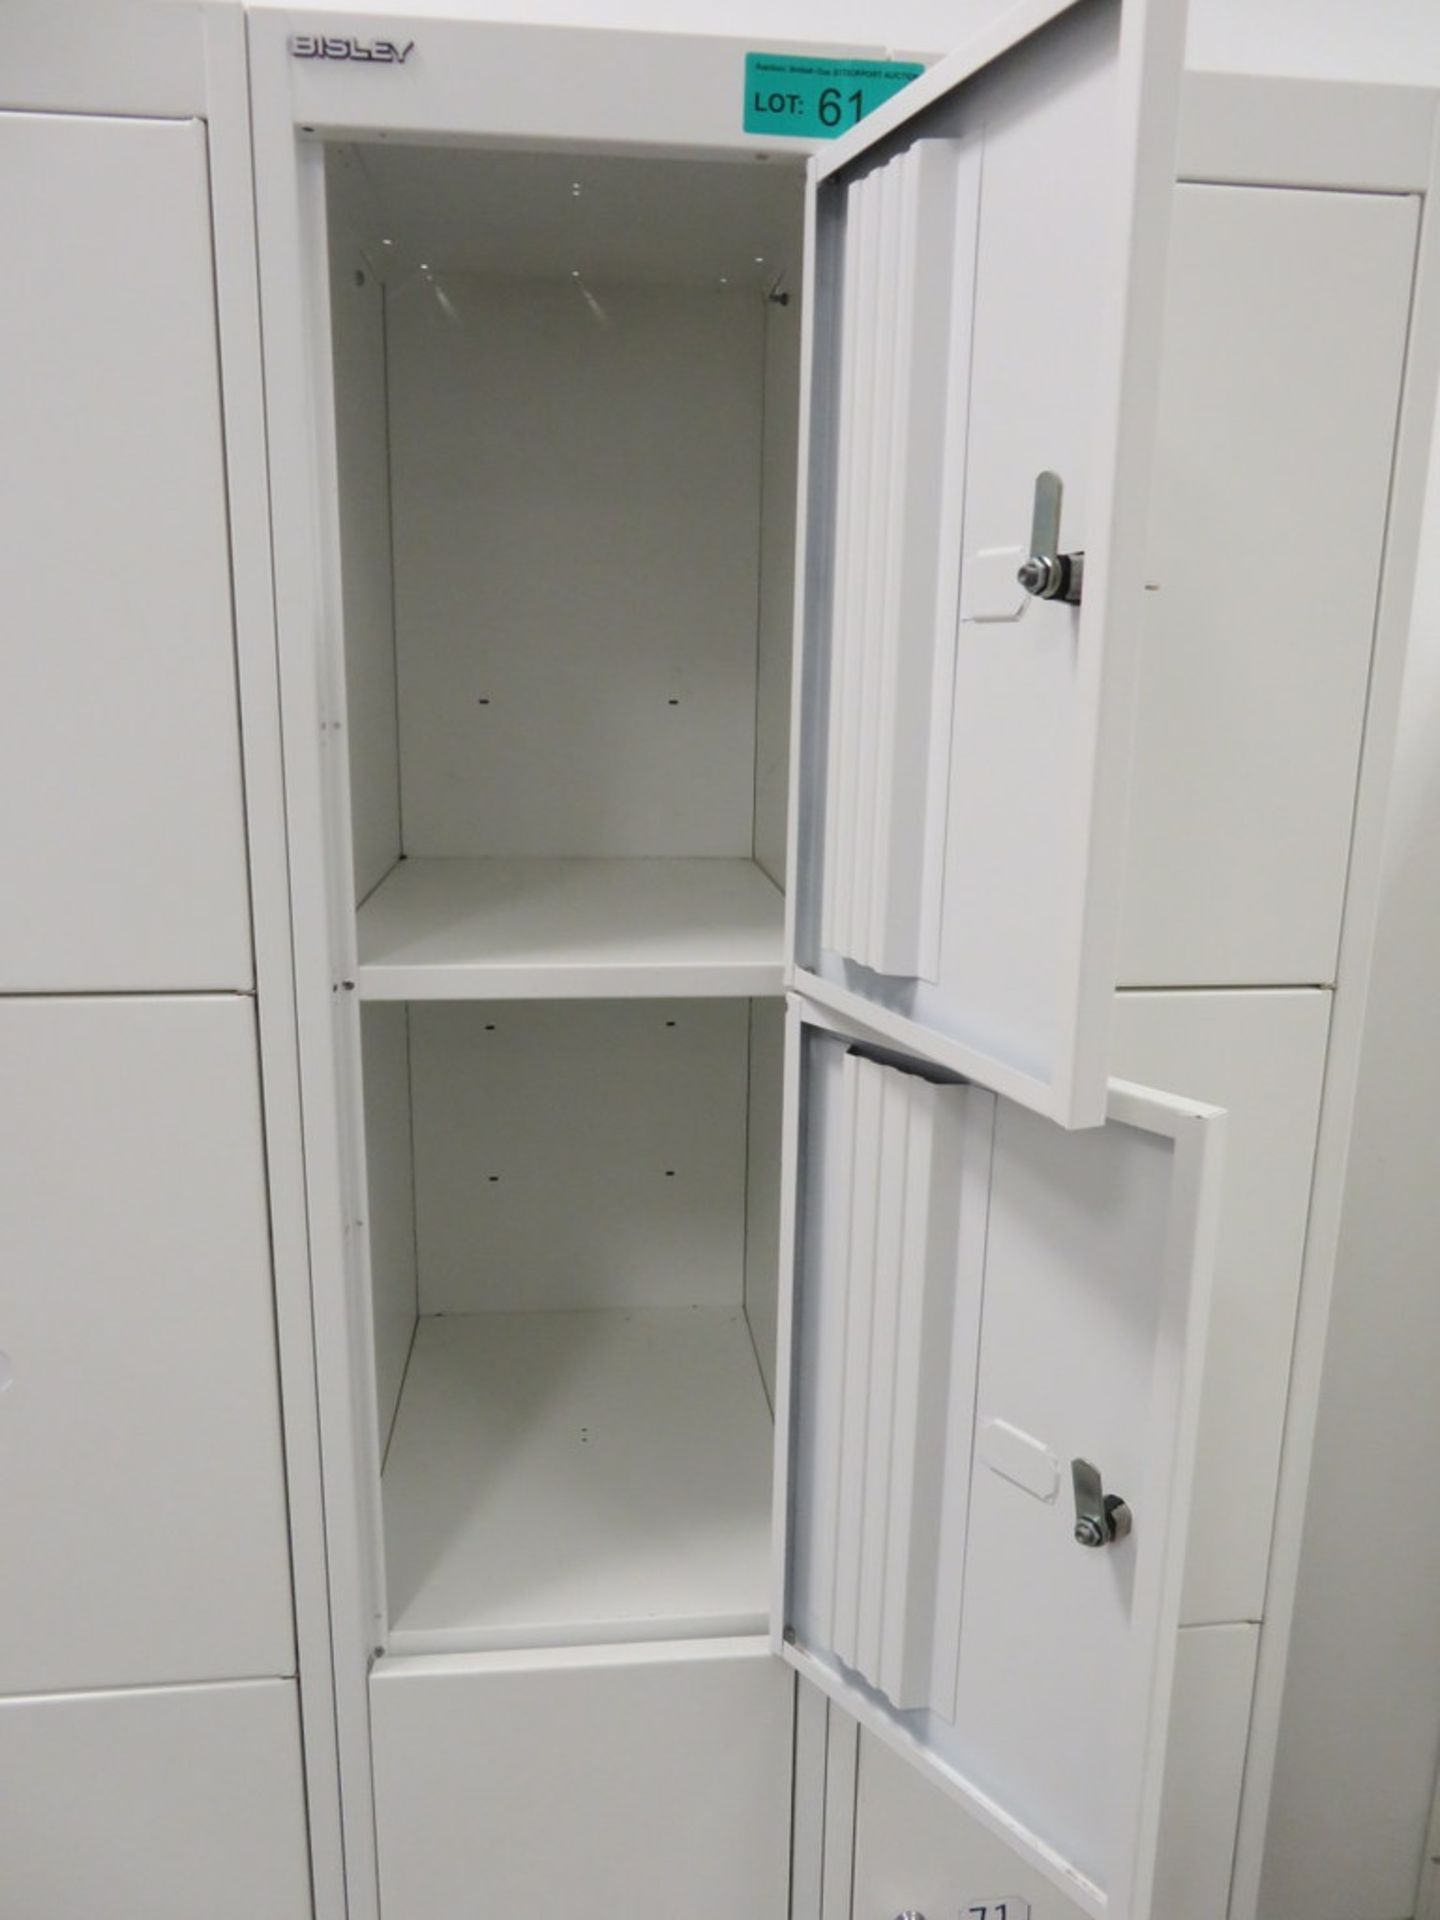 2x Bisley 4 Compartment Personnel Locker. - Image 3 of 3